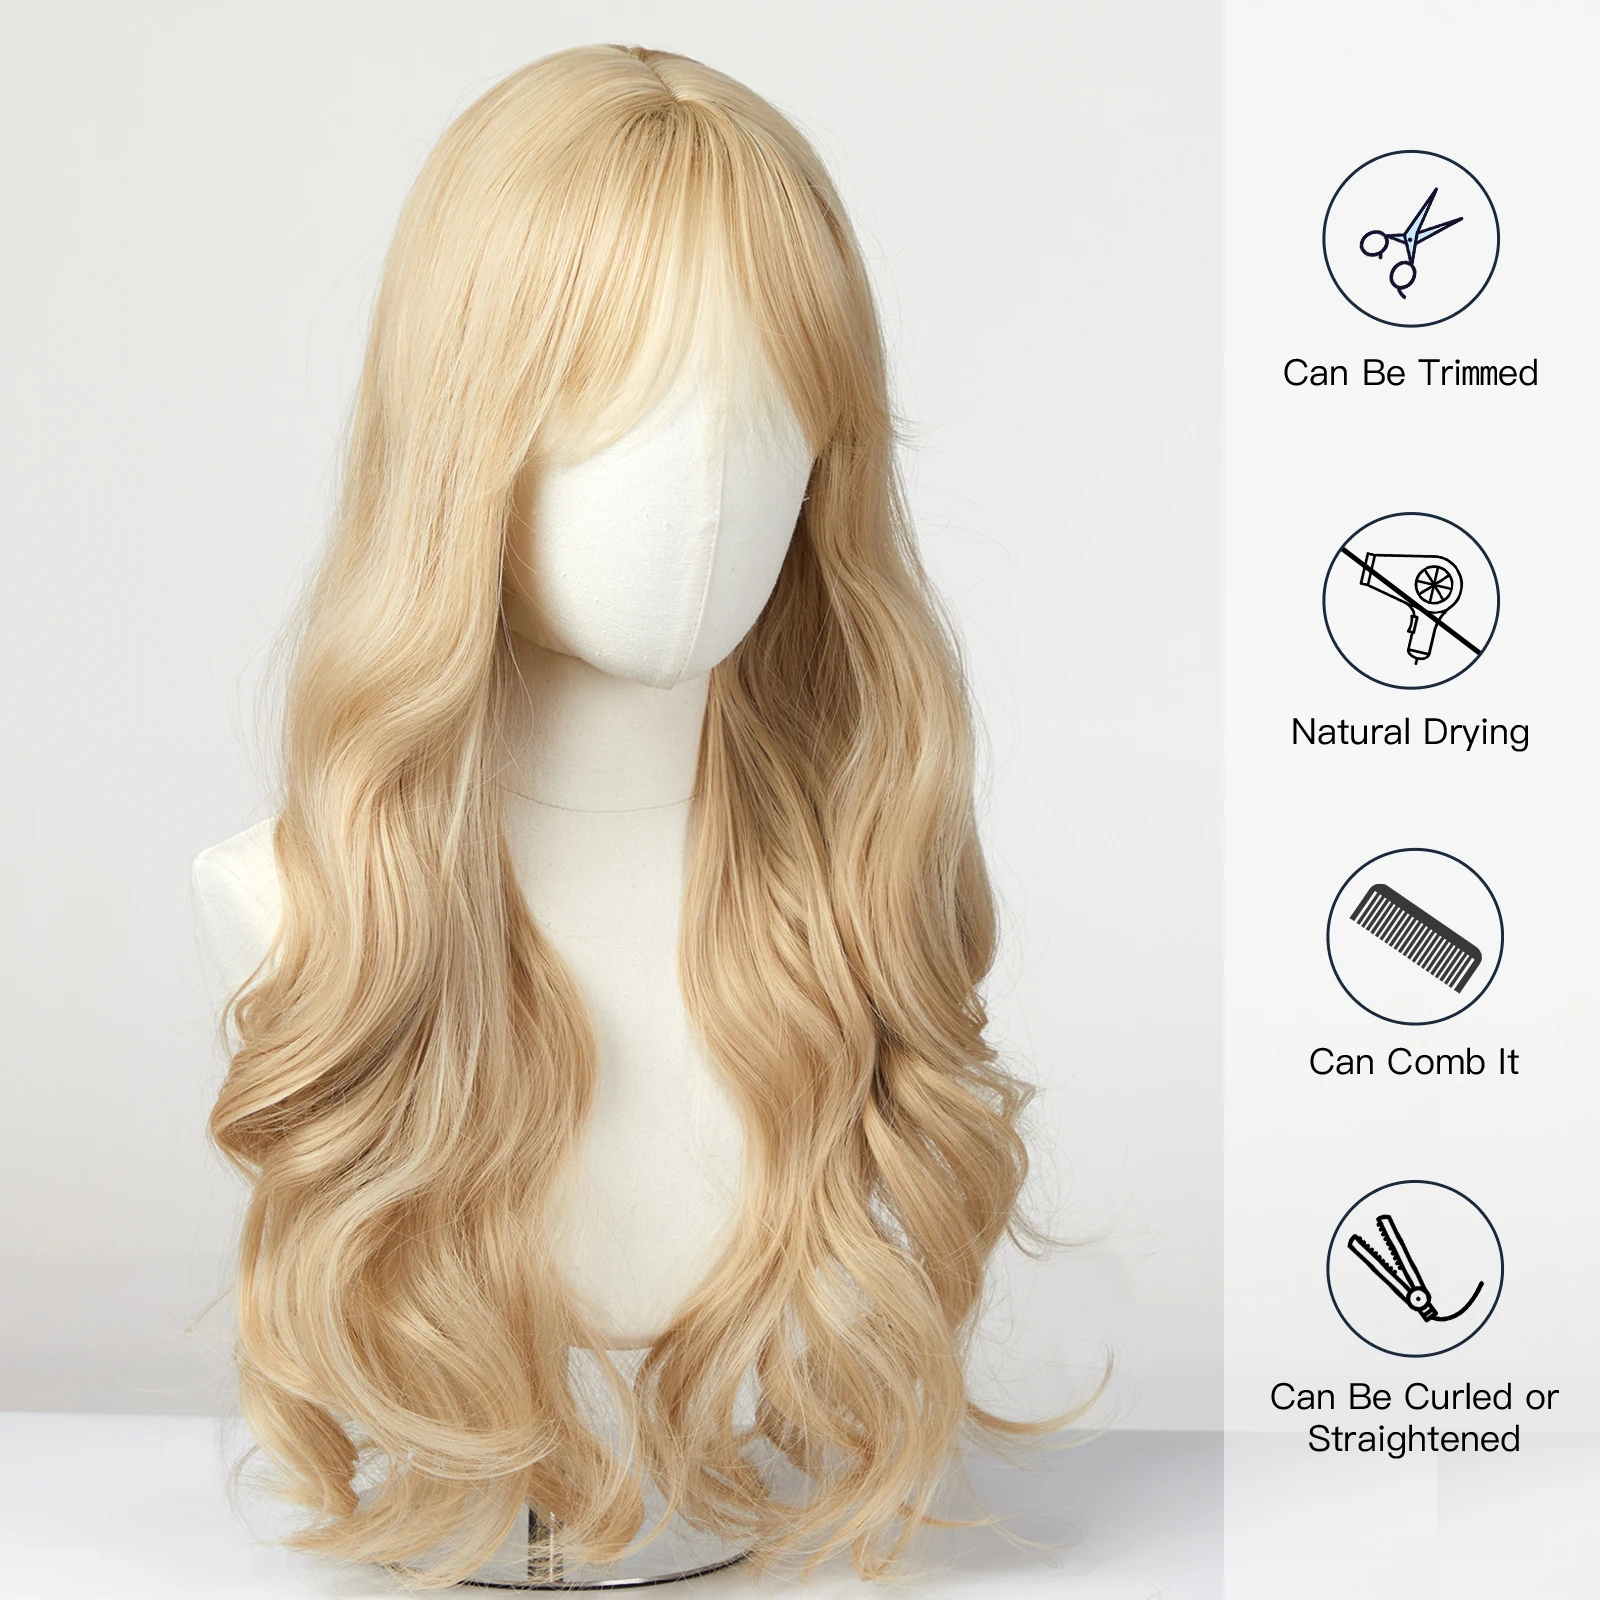 EASIHAIR Sandy Blonde Golden Wavy Synthetic Wigs with Long Bangs Cosplay Lolita Party Hair Wigs for Women Natural Heat Resistant